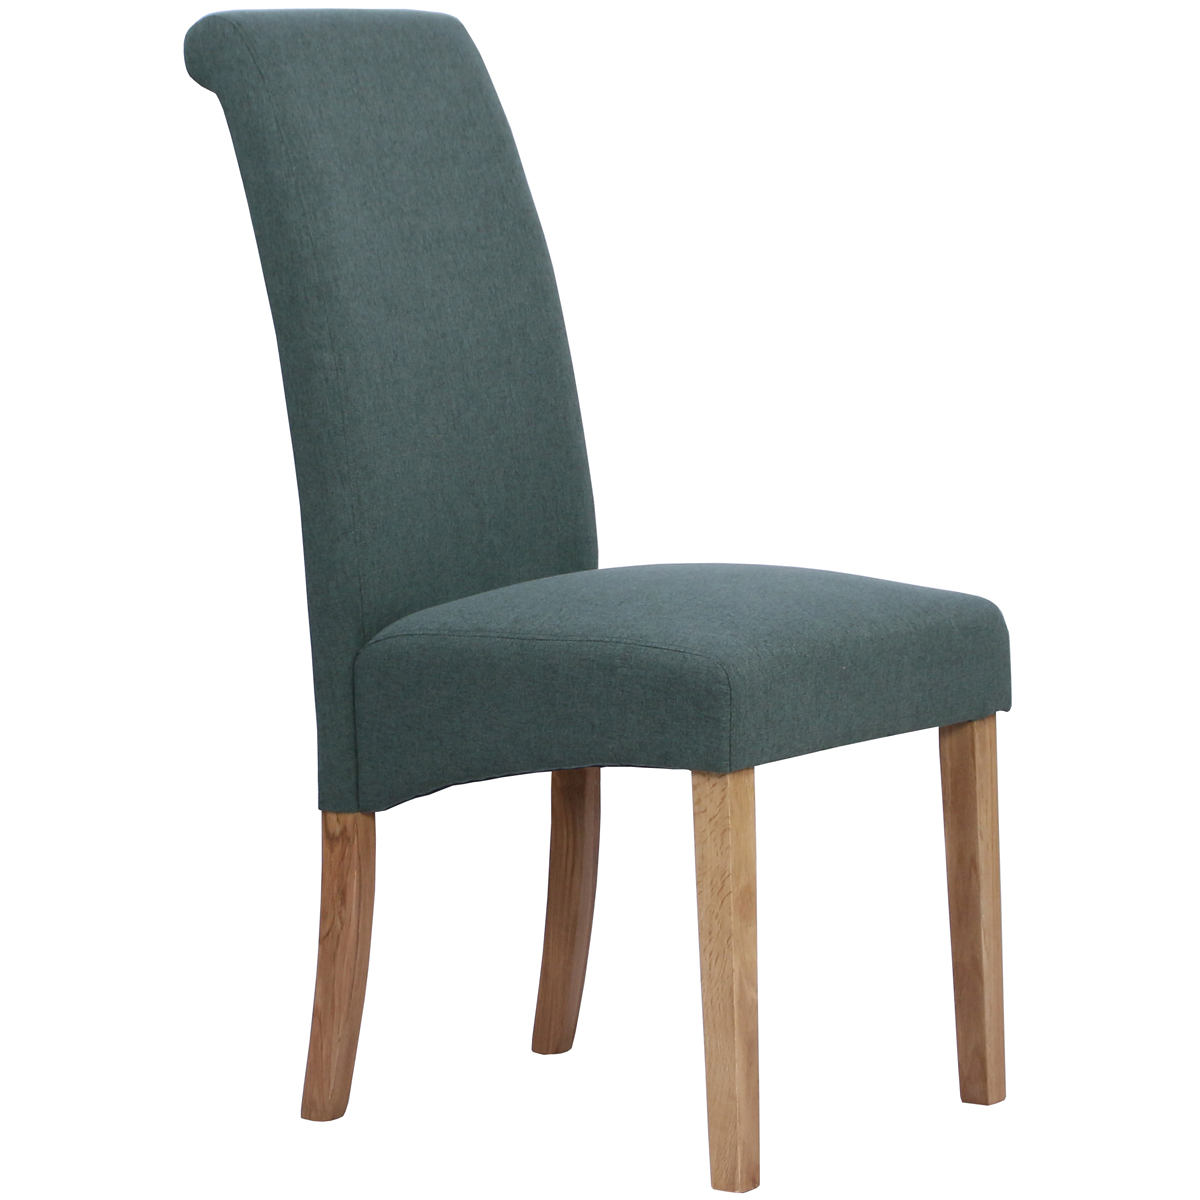 New Oak WES017 Dining Chair